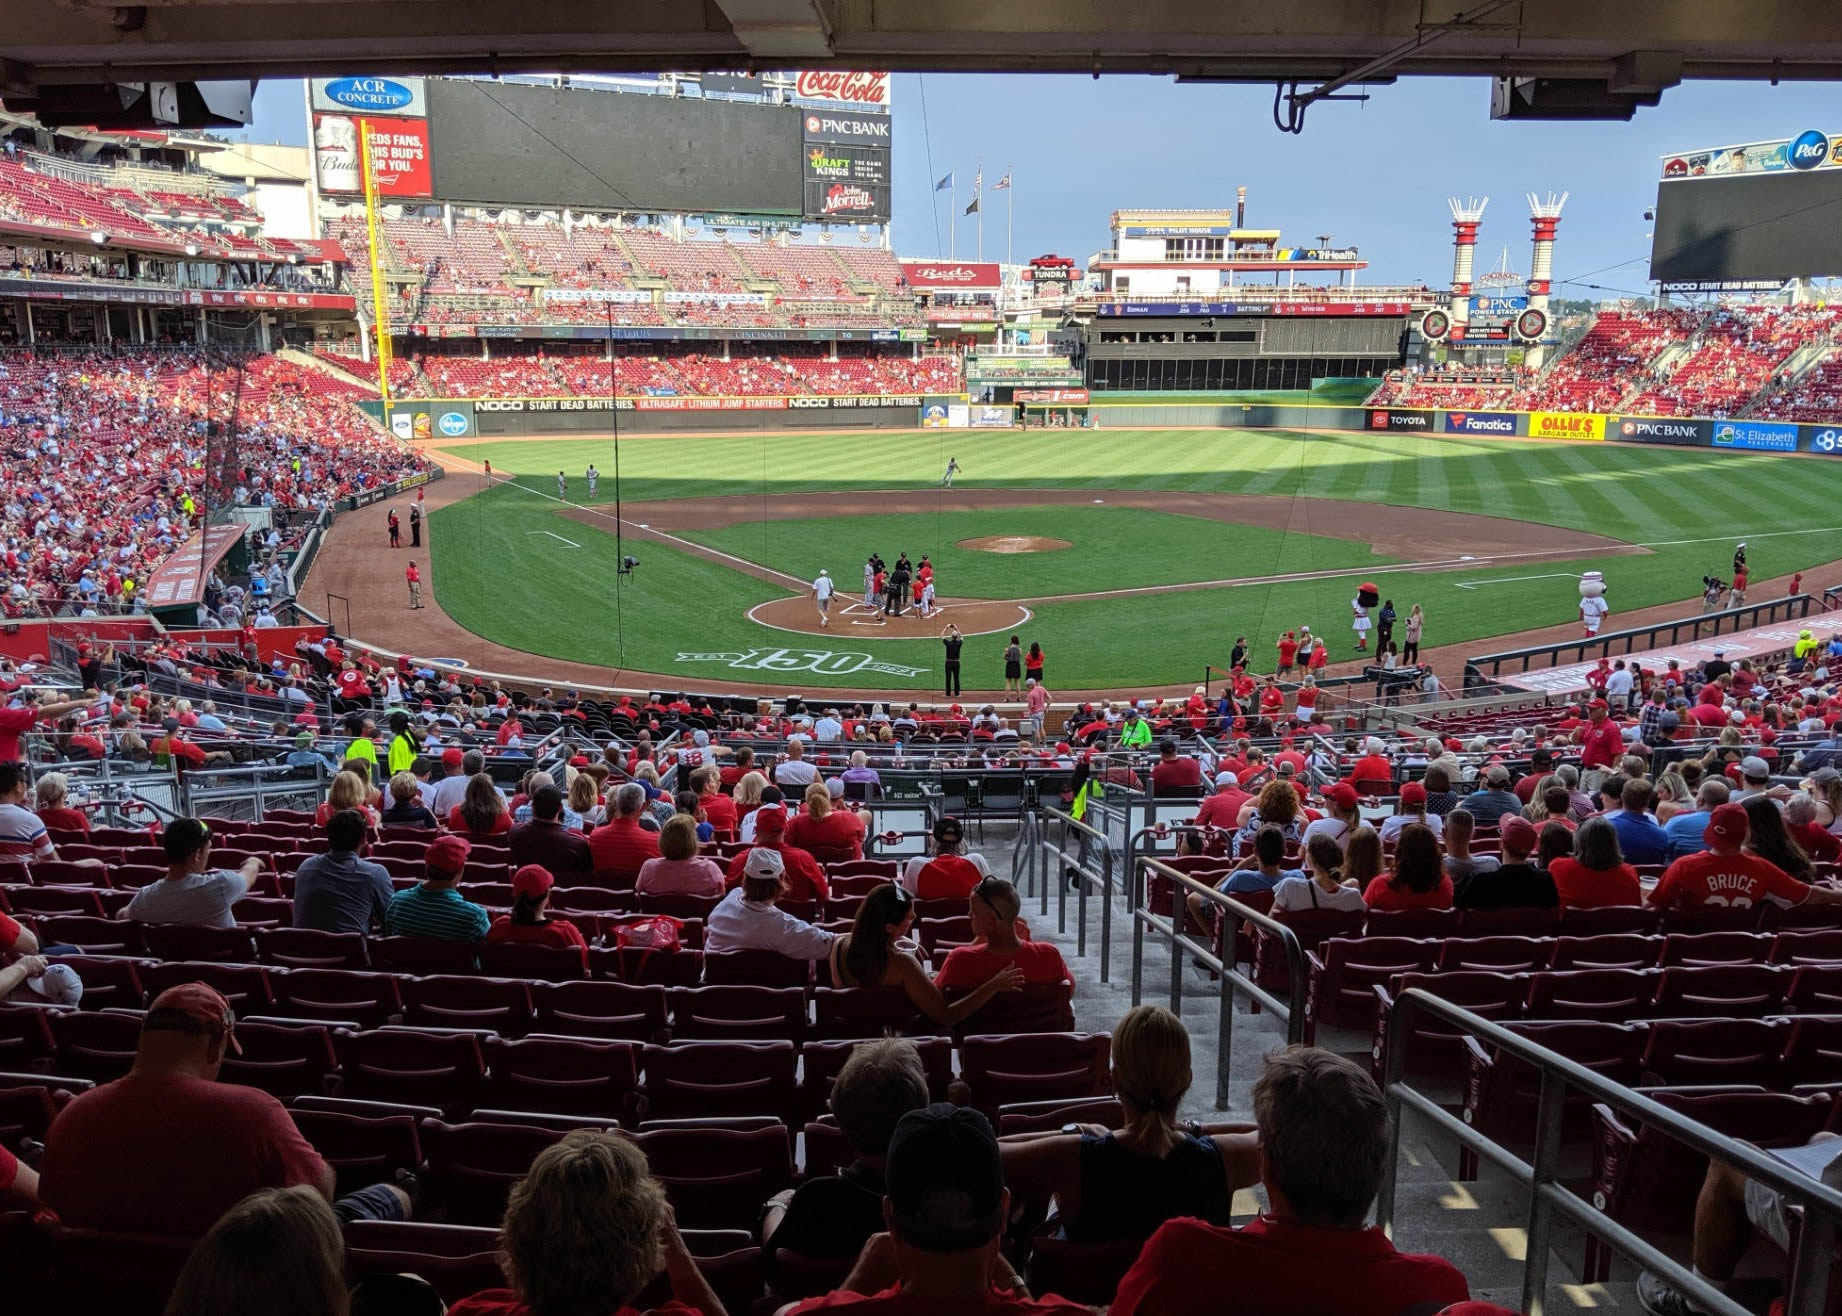 Section 125 at Great American Ball Park 